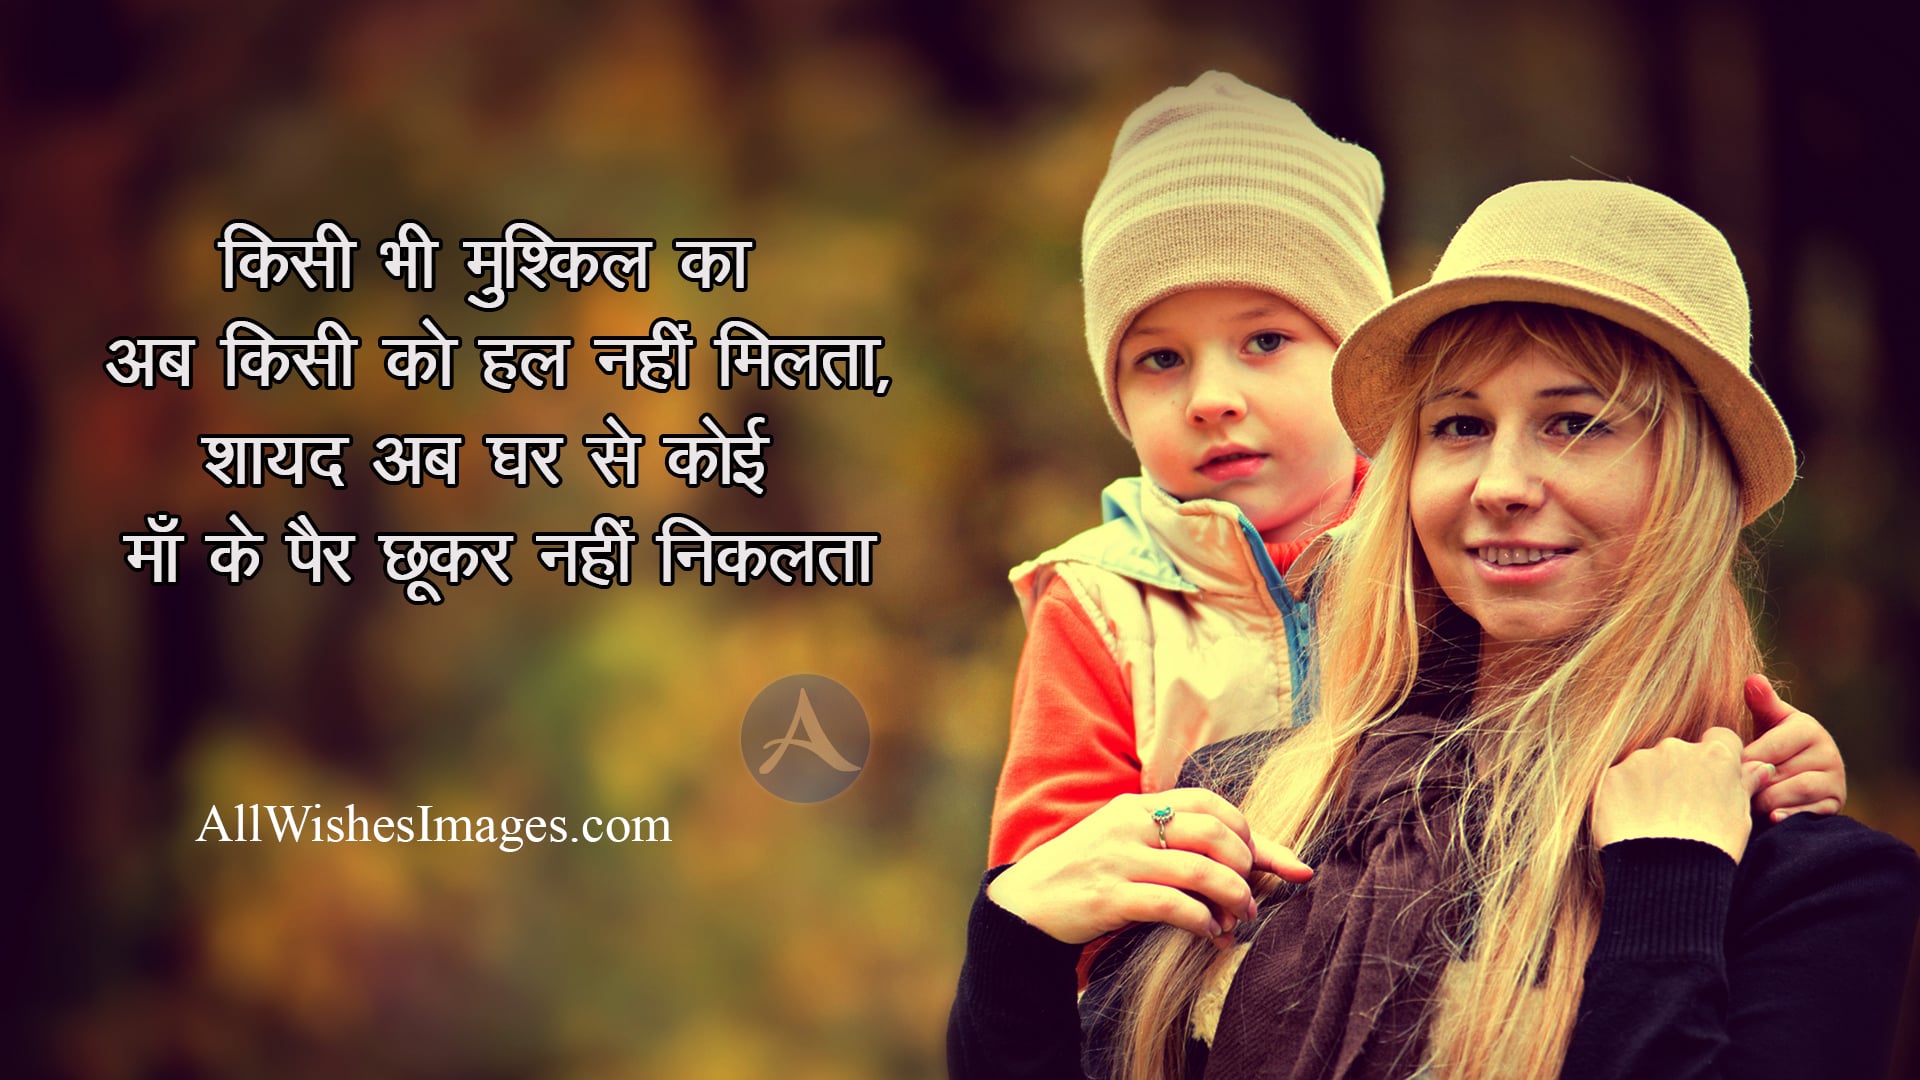 Maa Shayari Img In Hindi All Wishes Images Images For Whatsapp